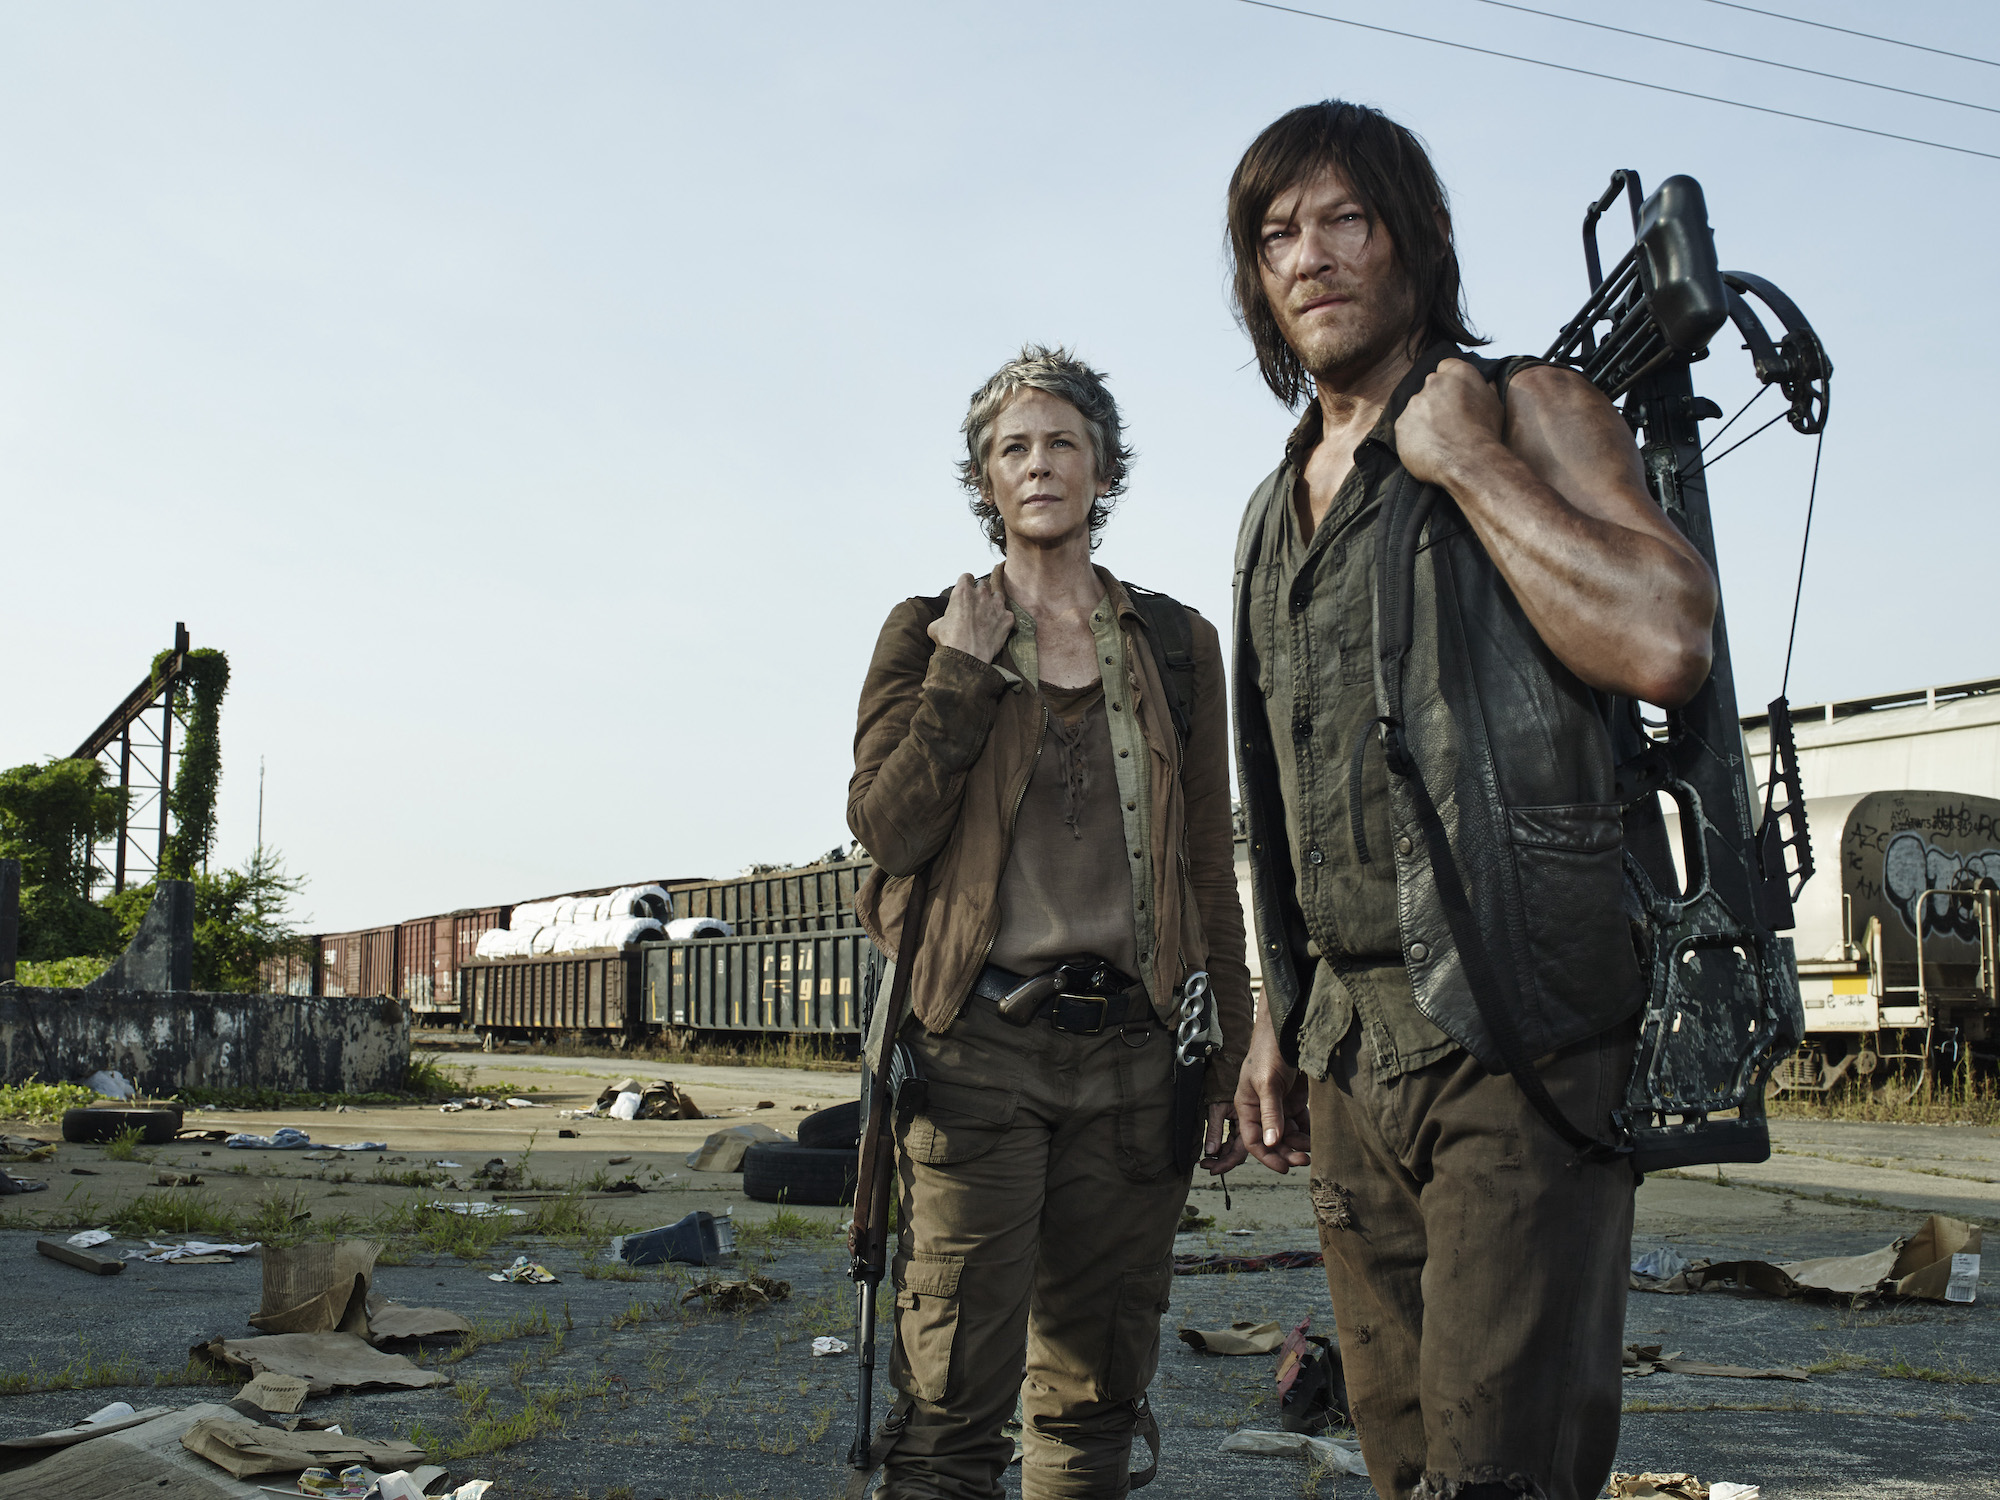 The Walking Dead' Spinoffs: A Complete Guide to All Six Shows